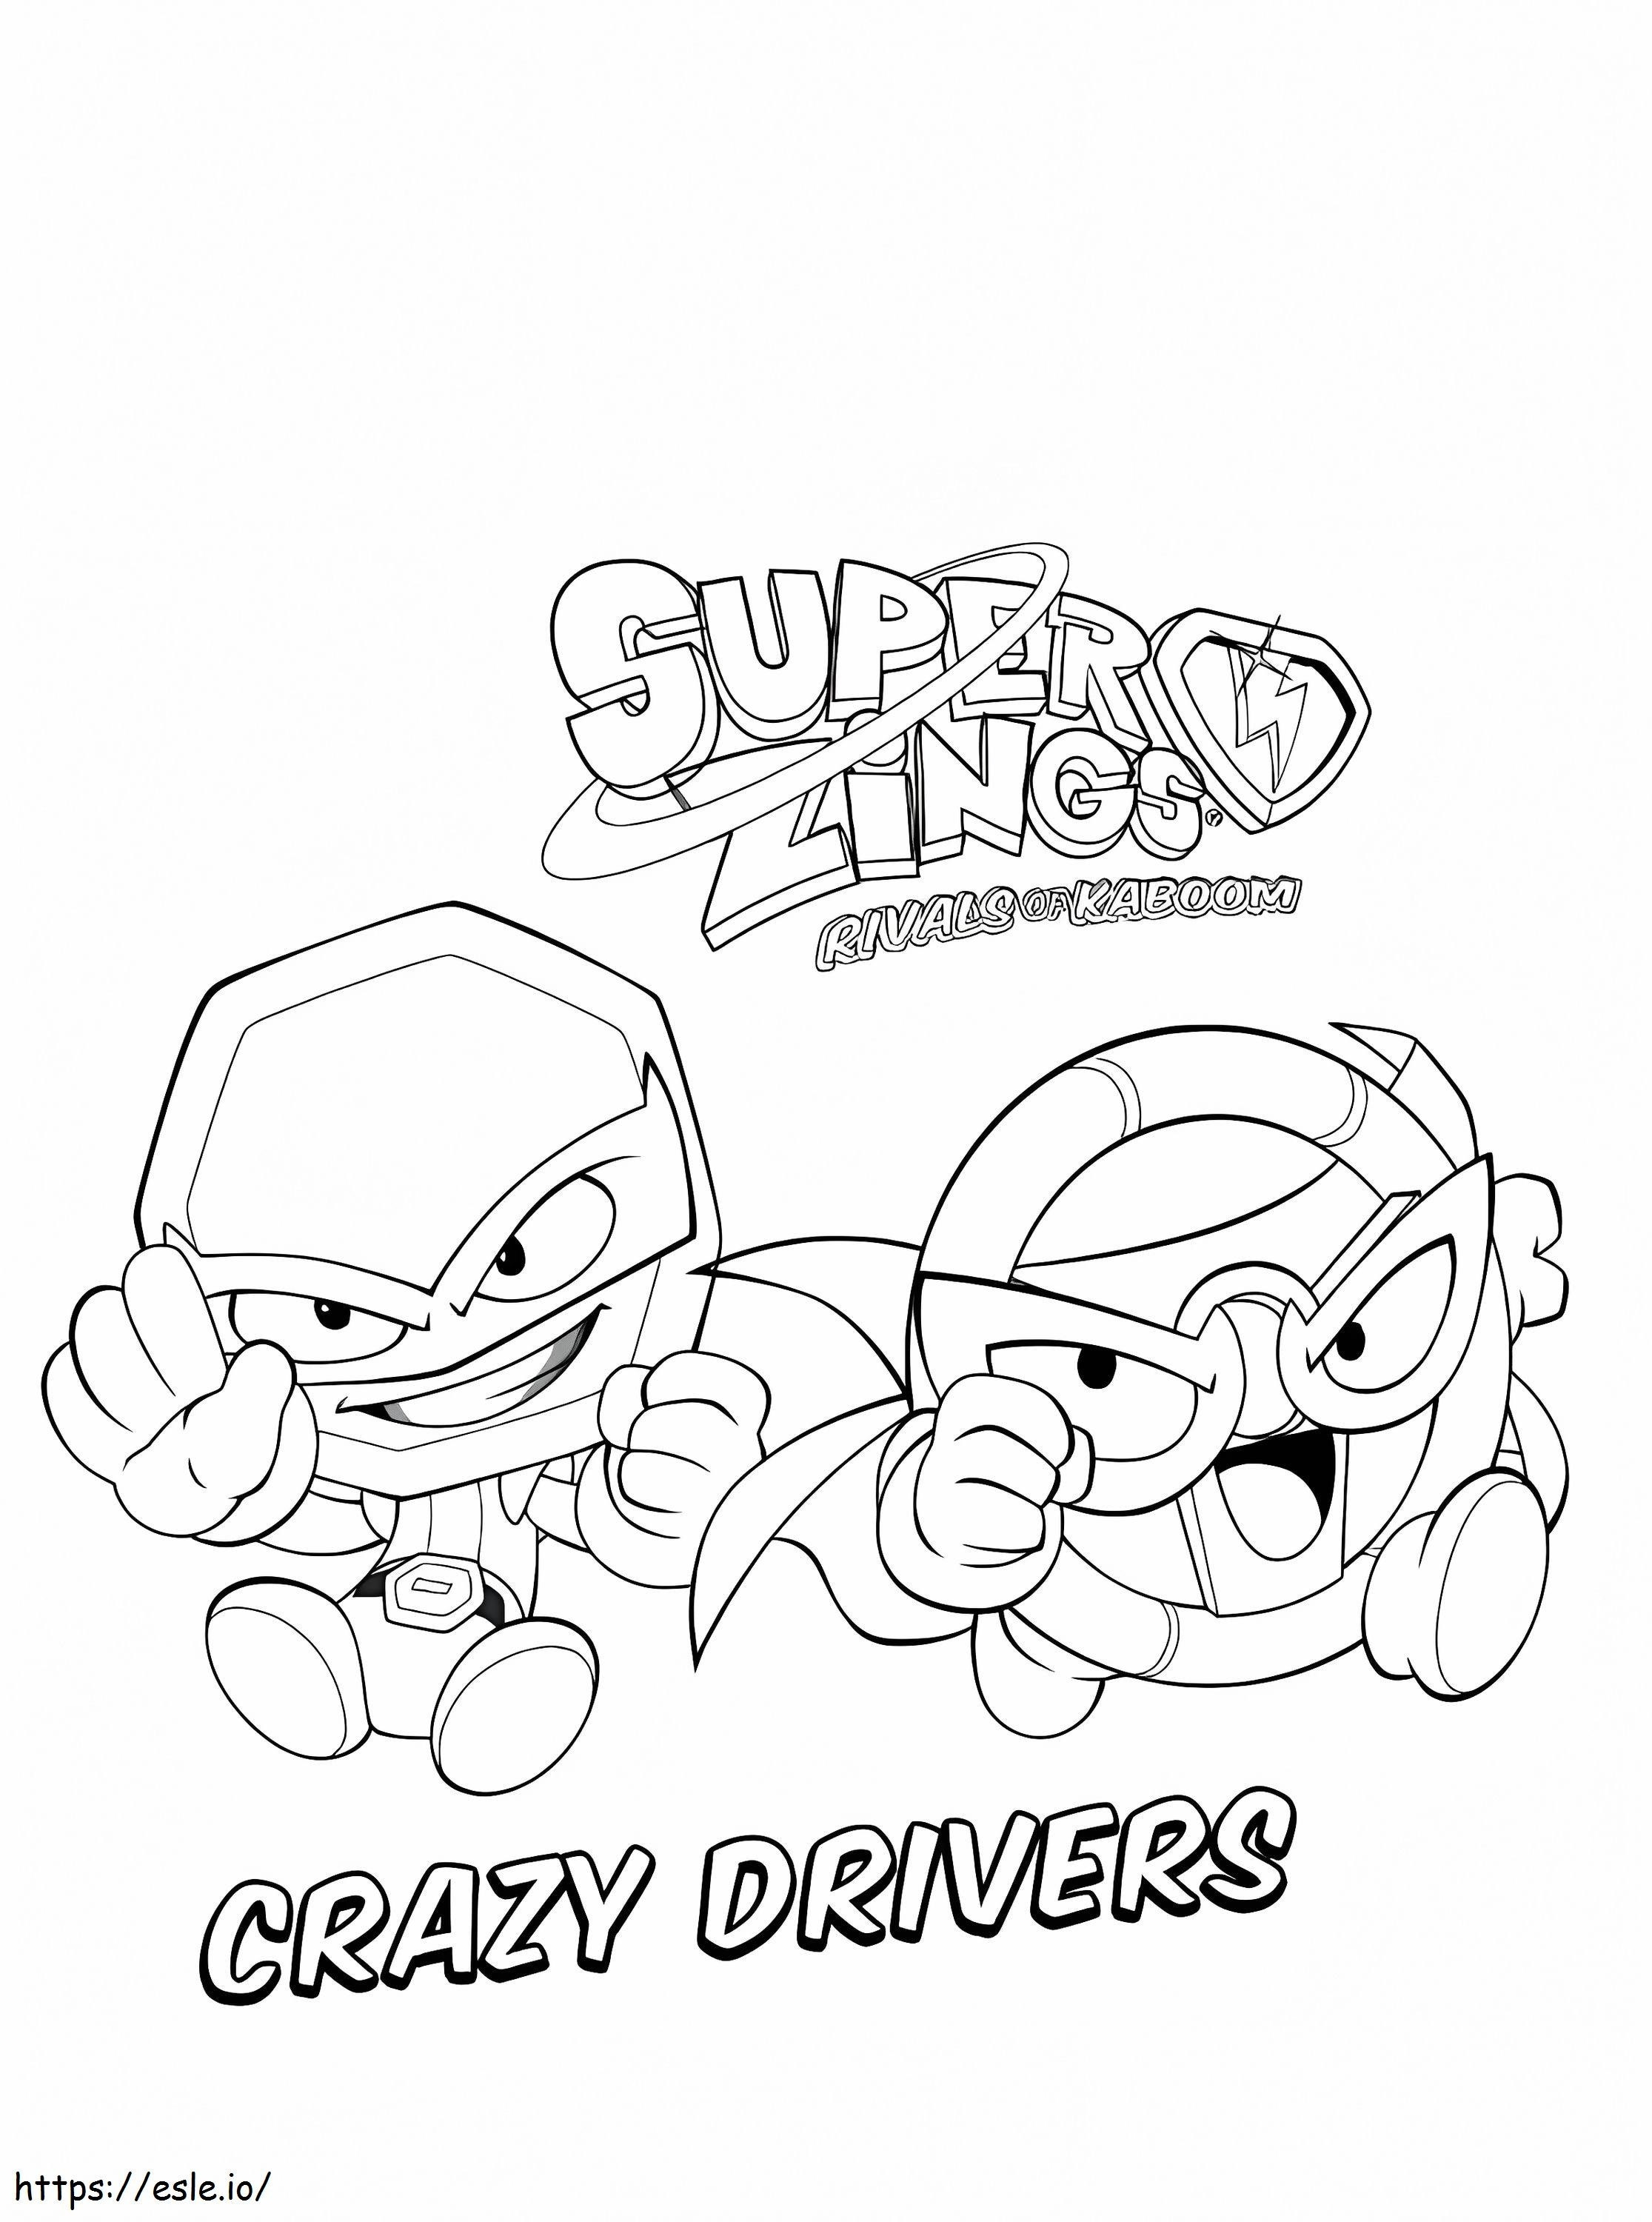 Crazy Drivers Superzings coloring page